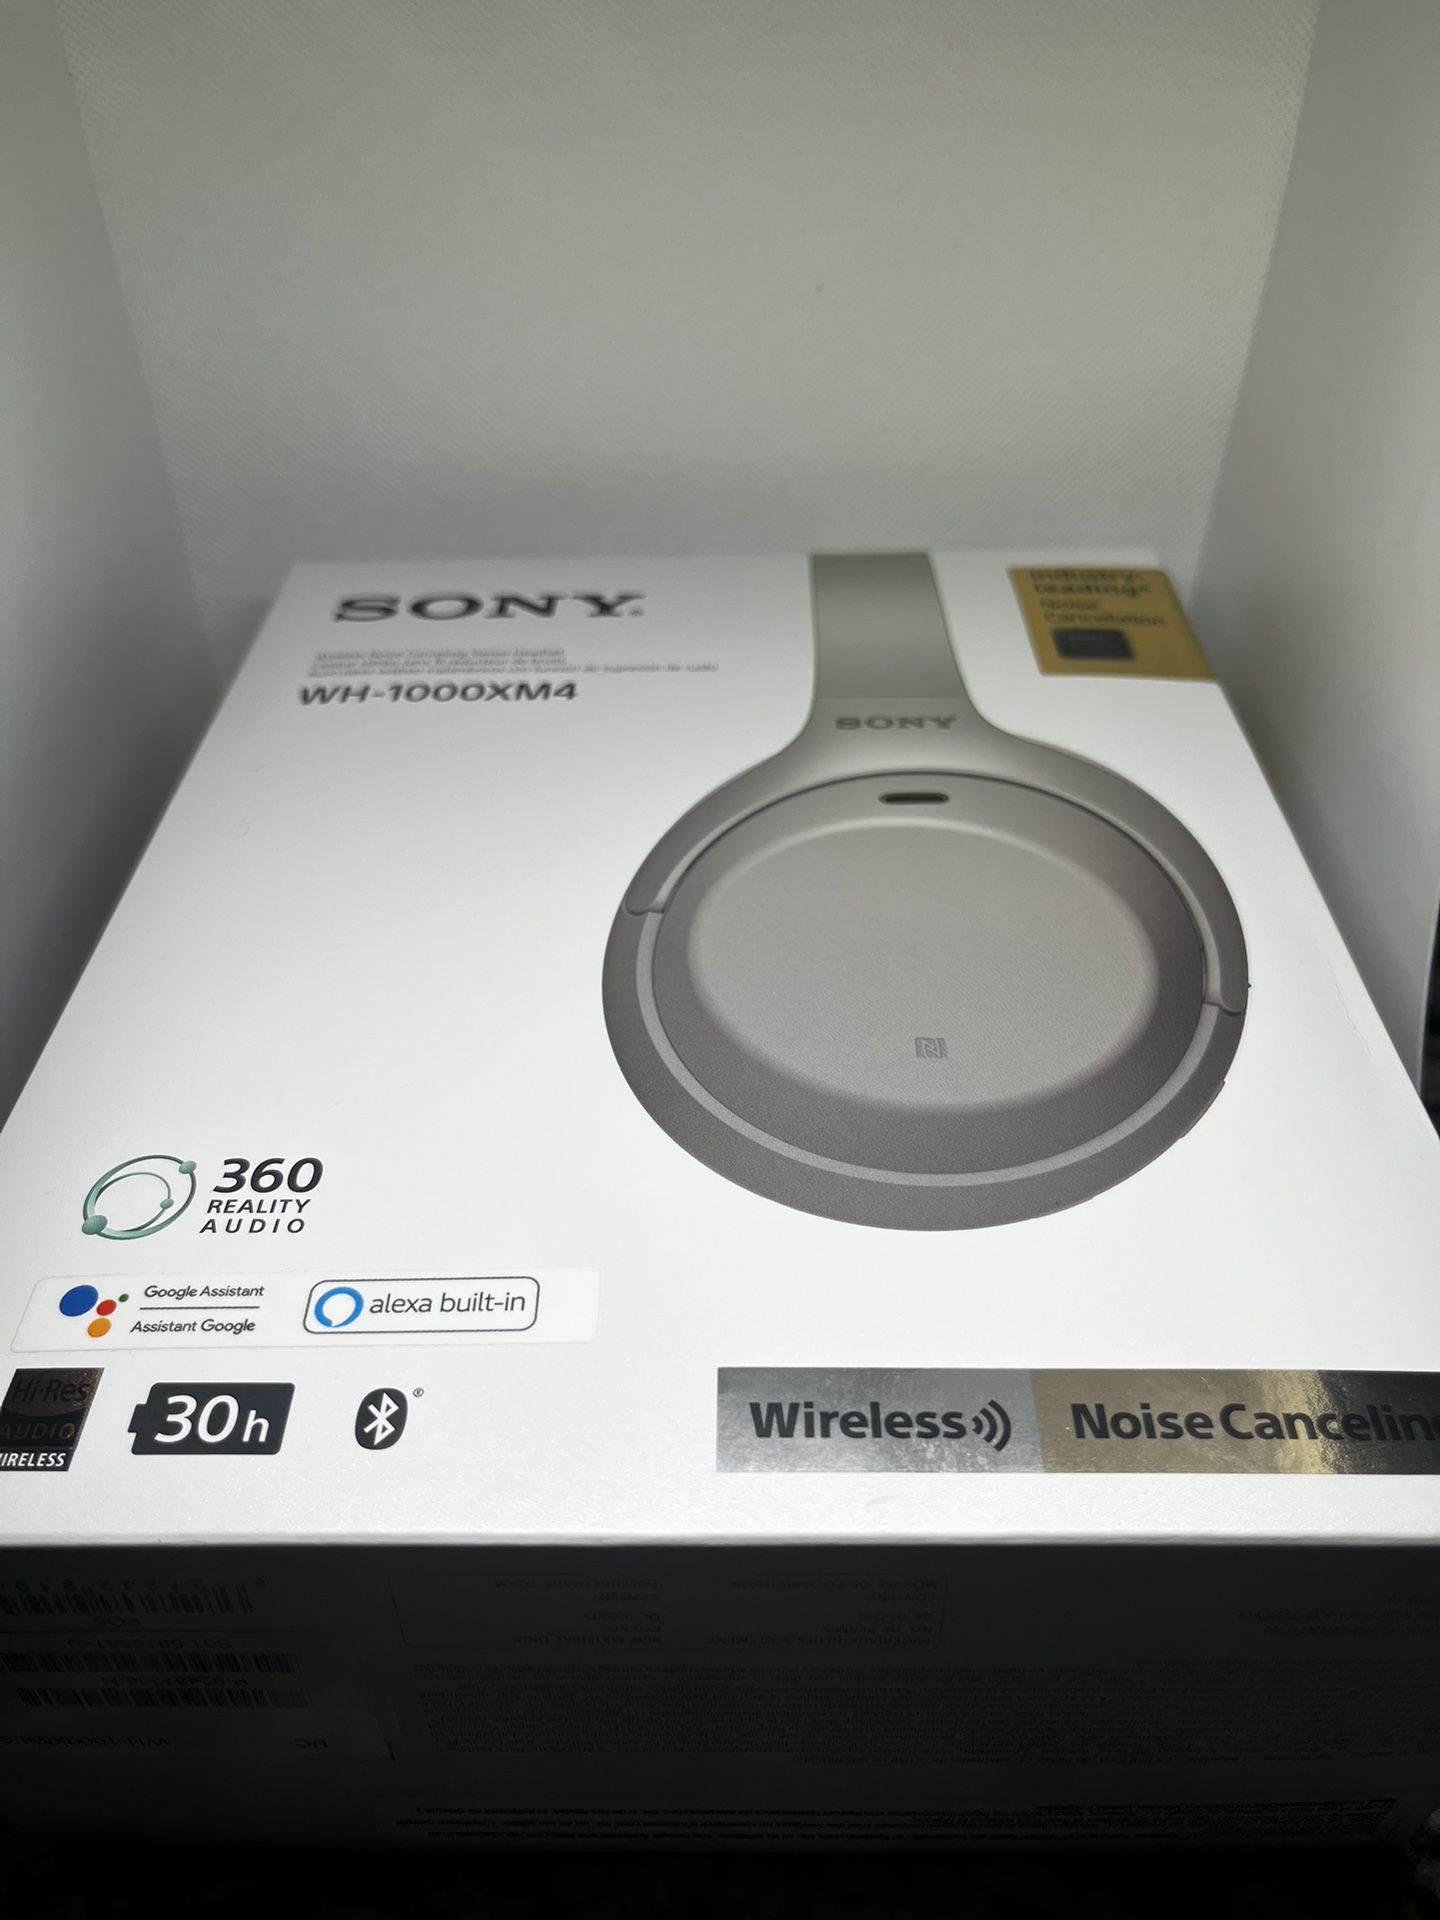 Sony WH1000XM4 Wireless Noise Canceling Over the Ear Headphones - Silver